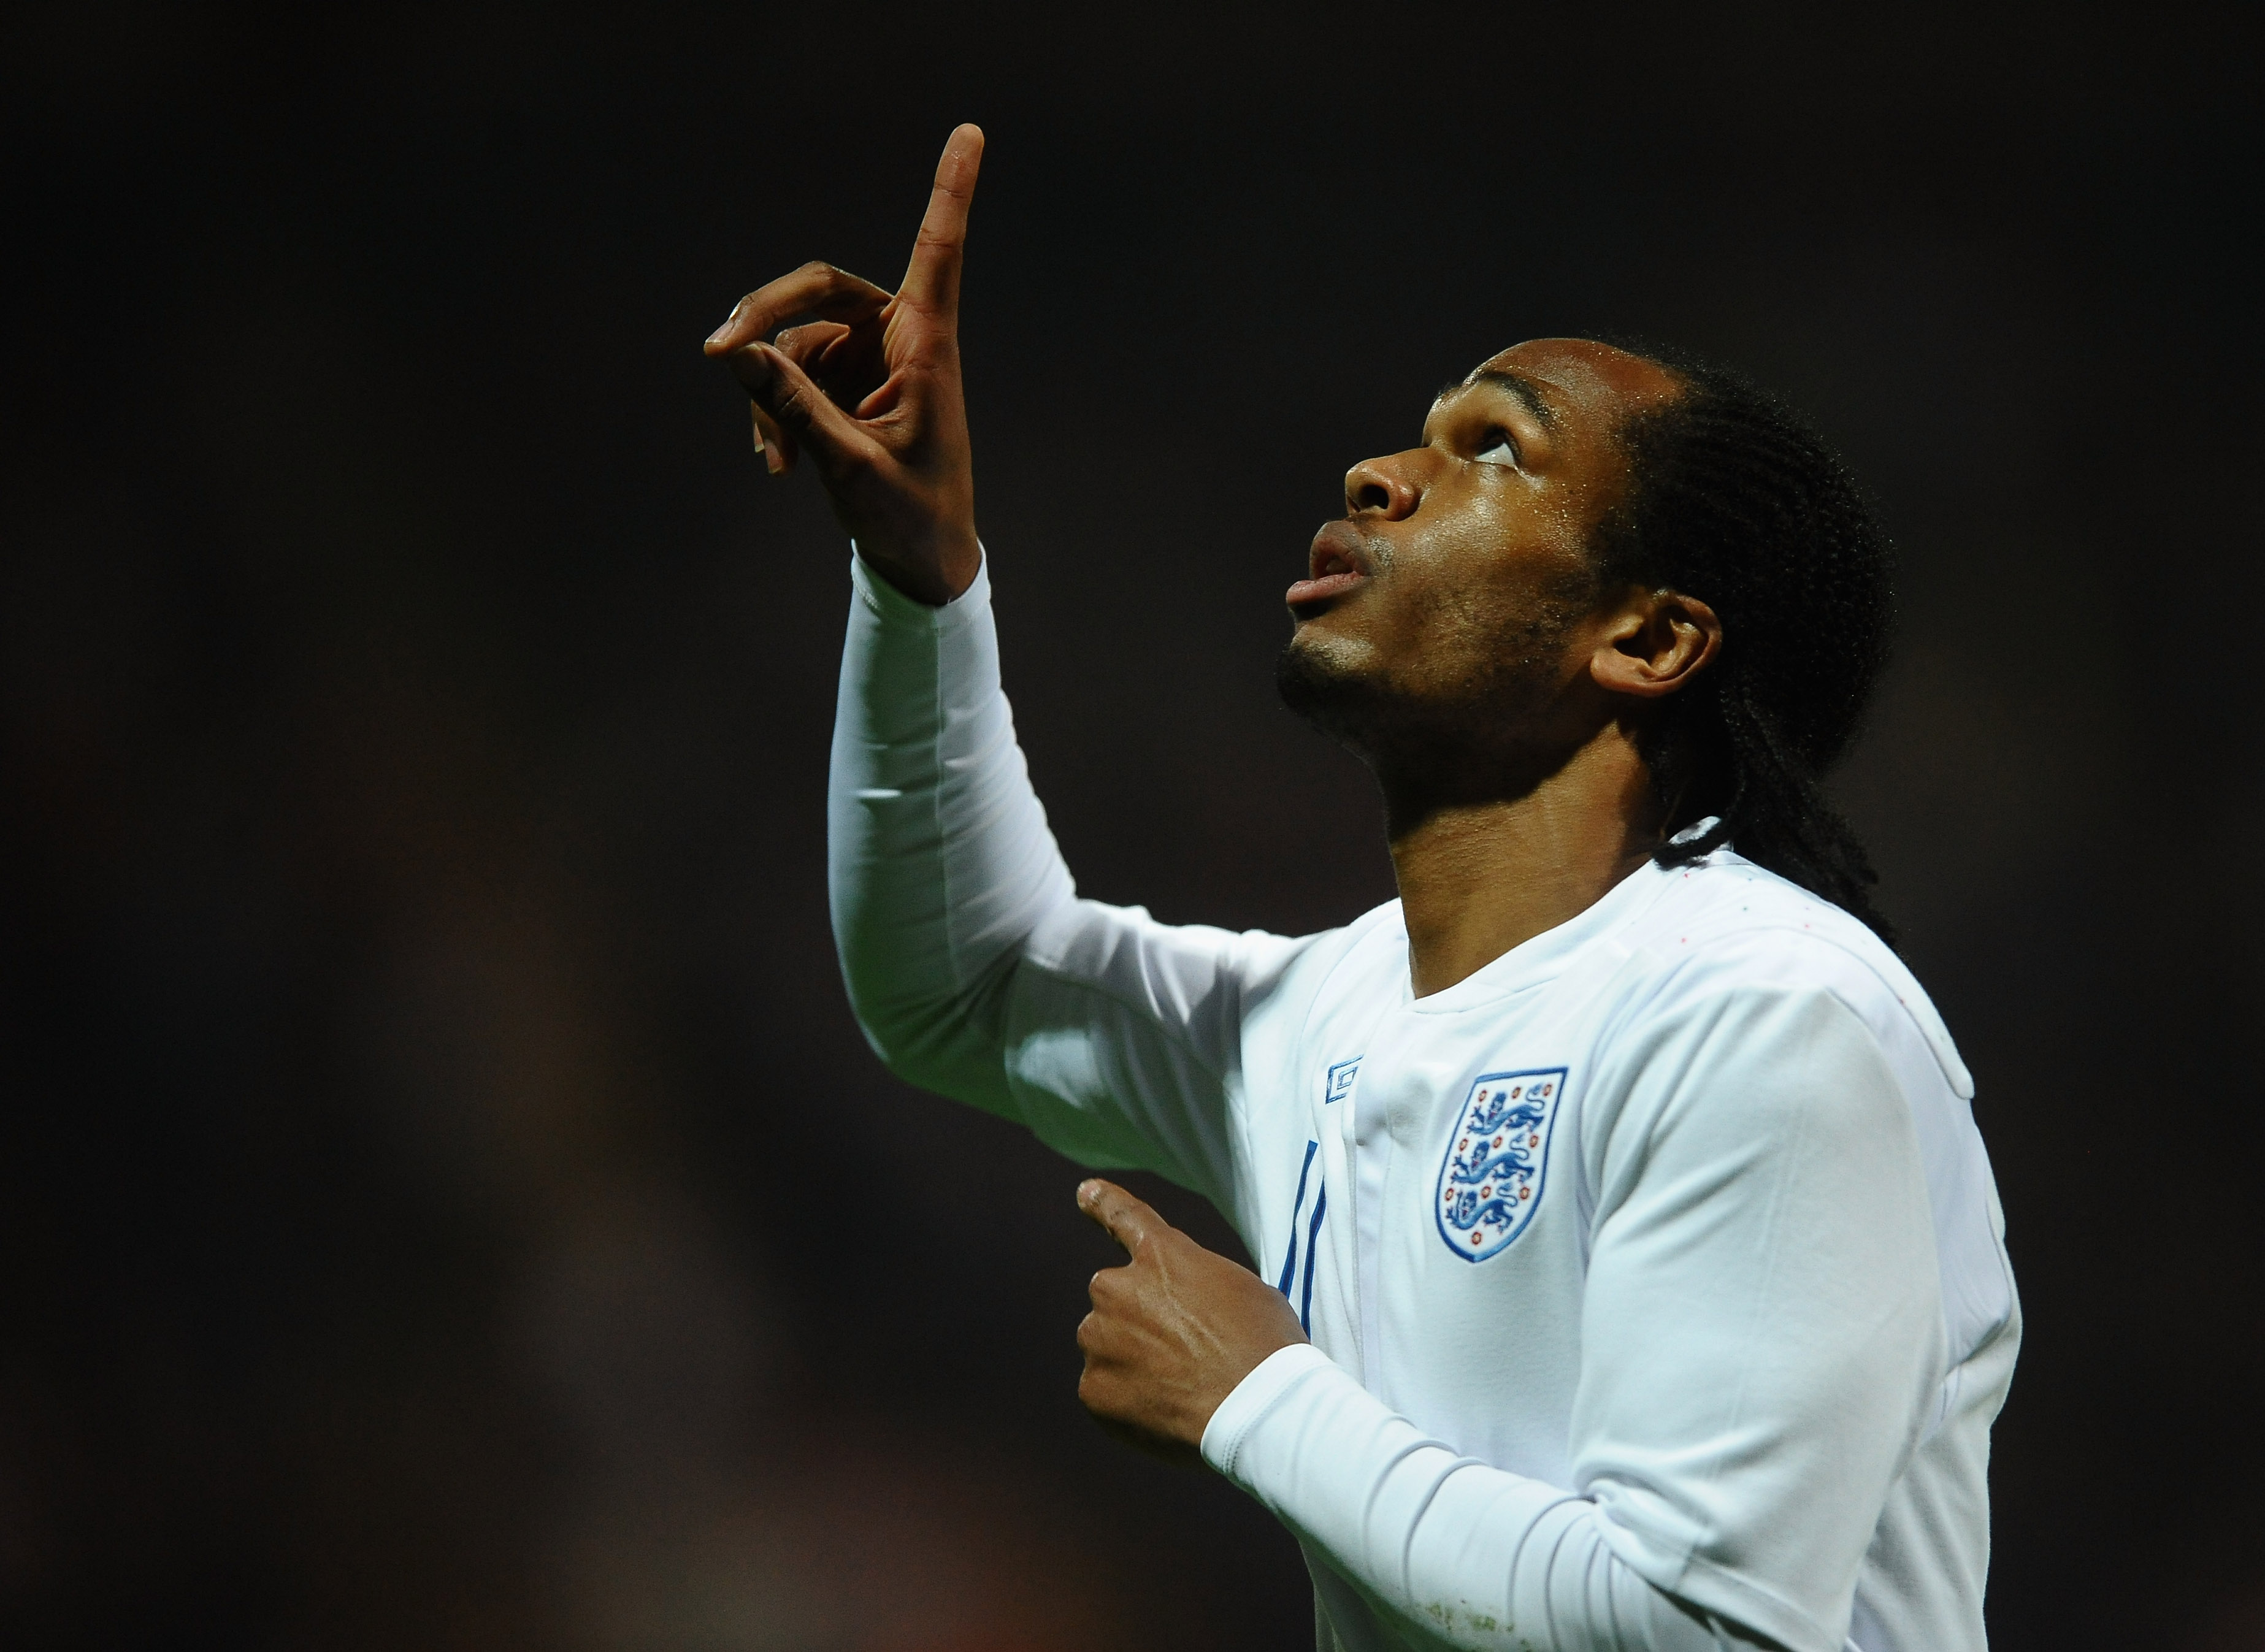 PRESTON, LANCASHIRE - MARCH 28: Nathan Delfouneso of England celebrates scoring the opening goal during the International Friendly match between England U-21 and Iceland U21 at Deepdale on March 28, 2011 in Preston, Lancashire.  (Photo by Laurence Griffit